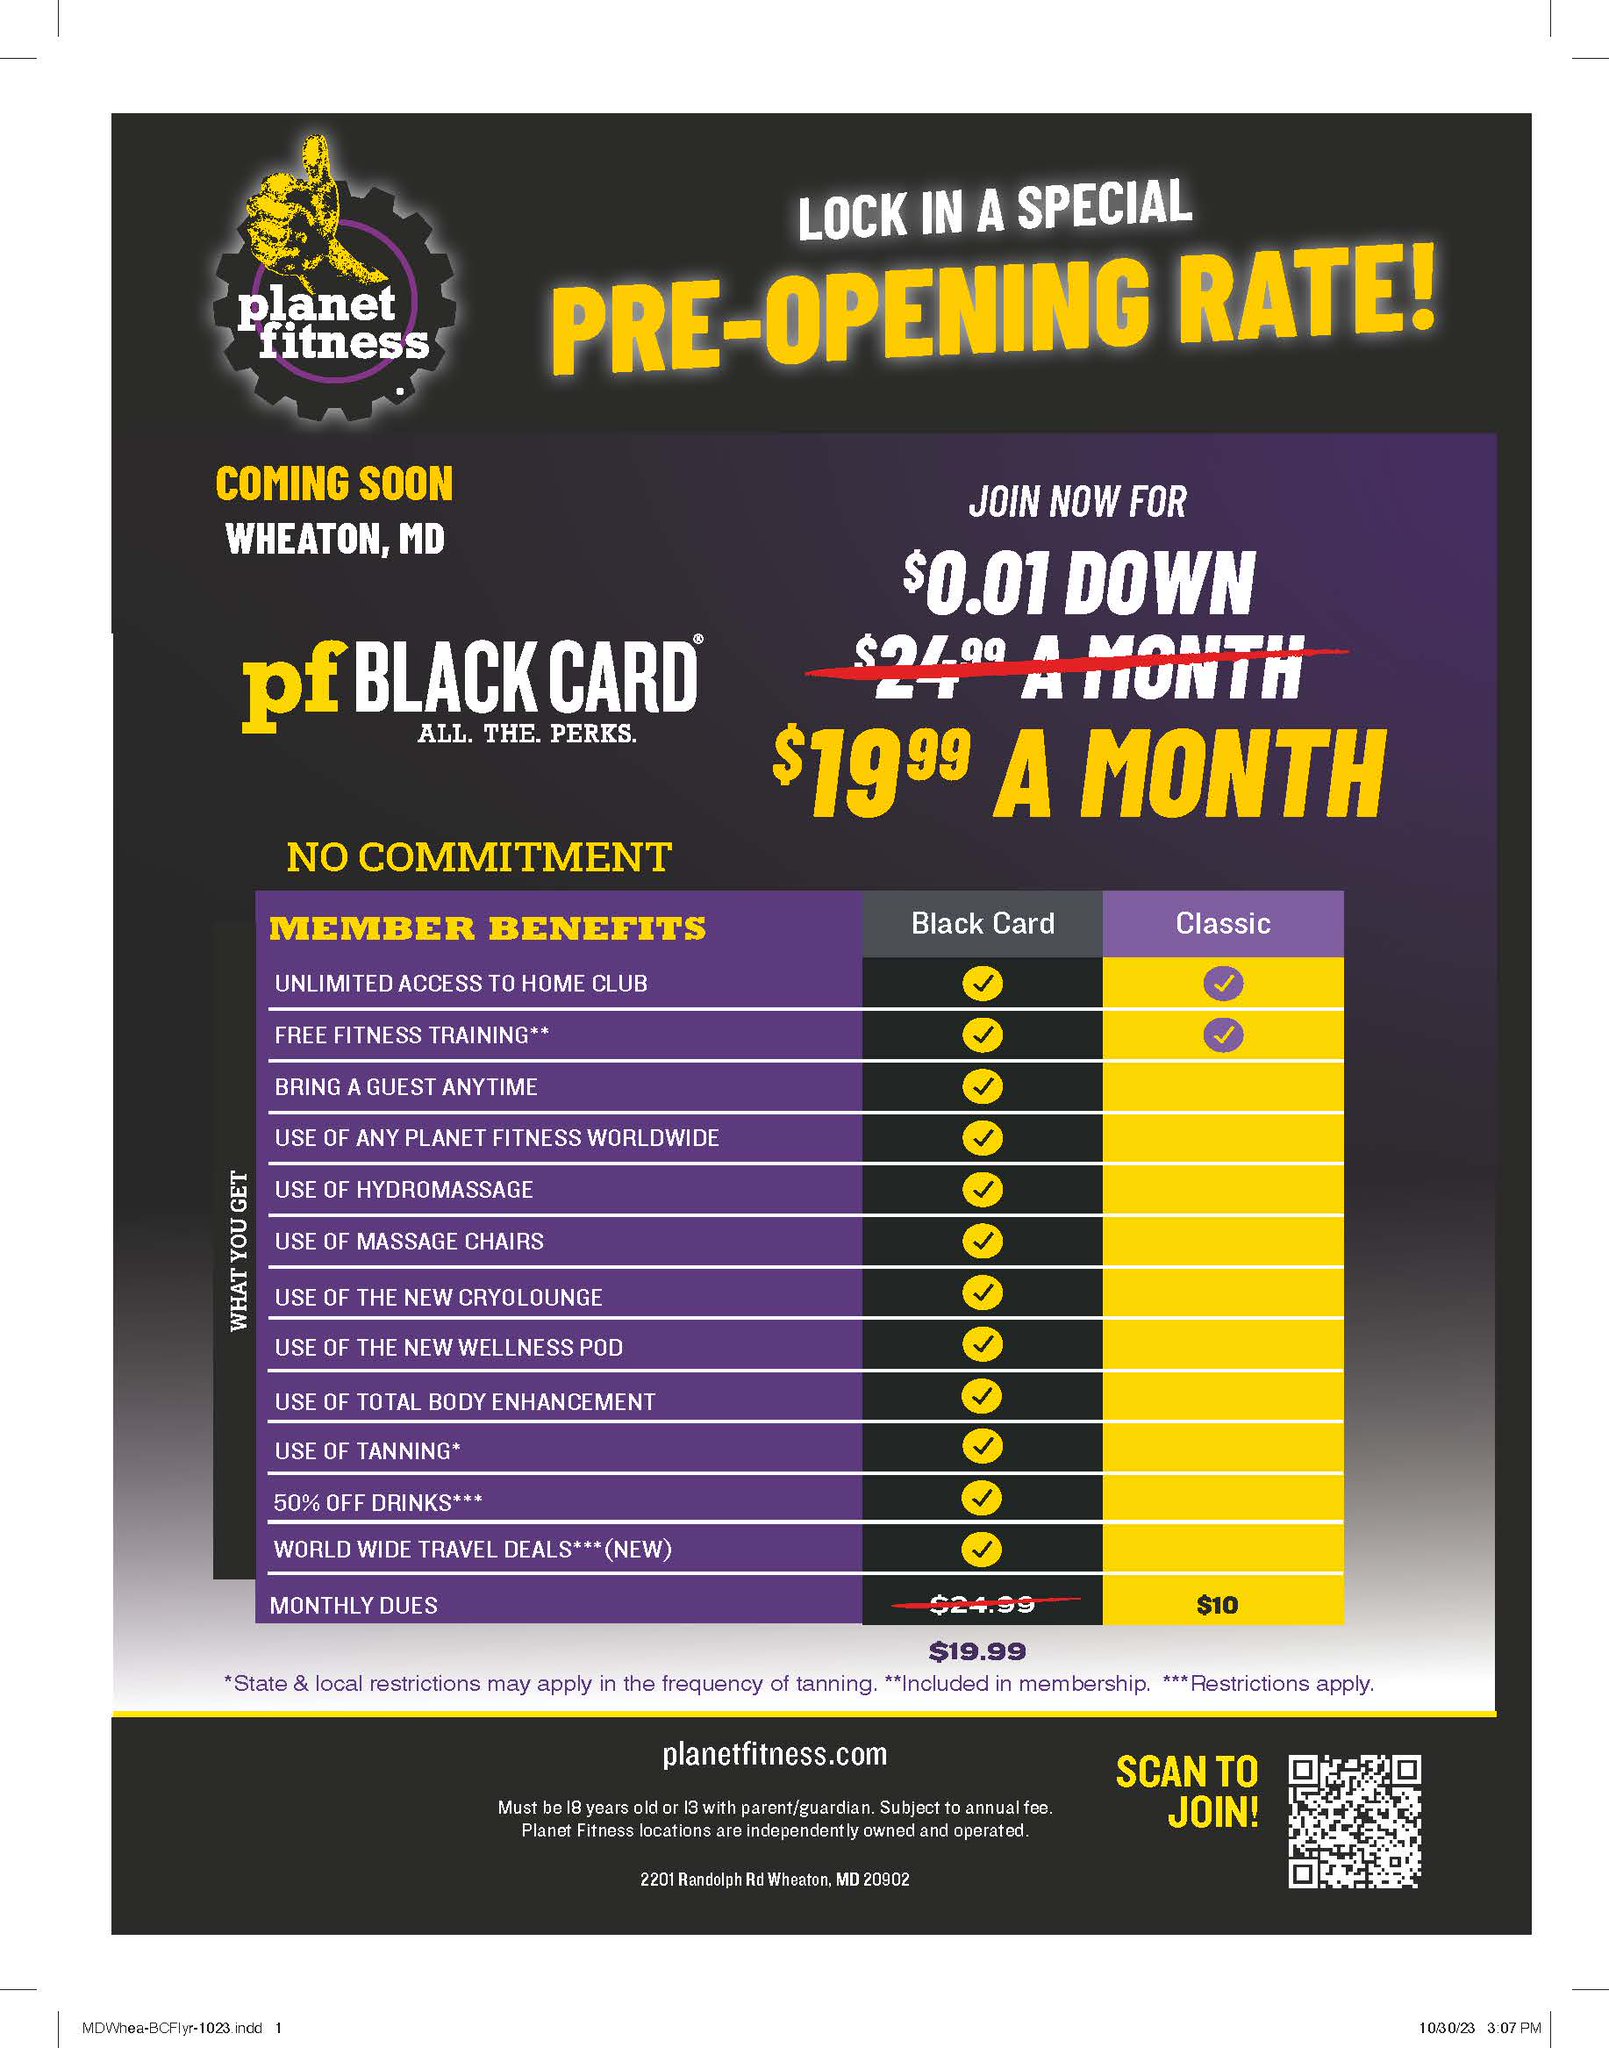 Planet Fitness opens location in Wheaton - Maryland Daily Record